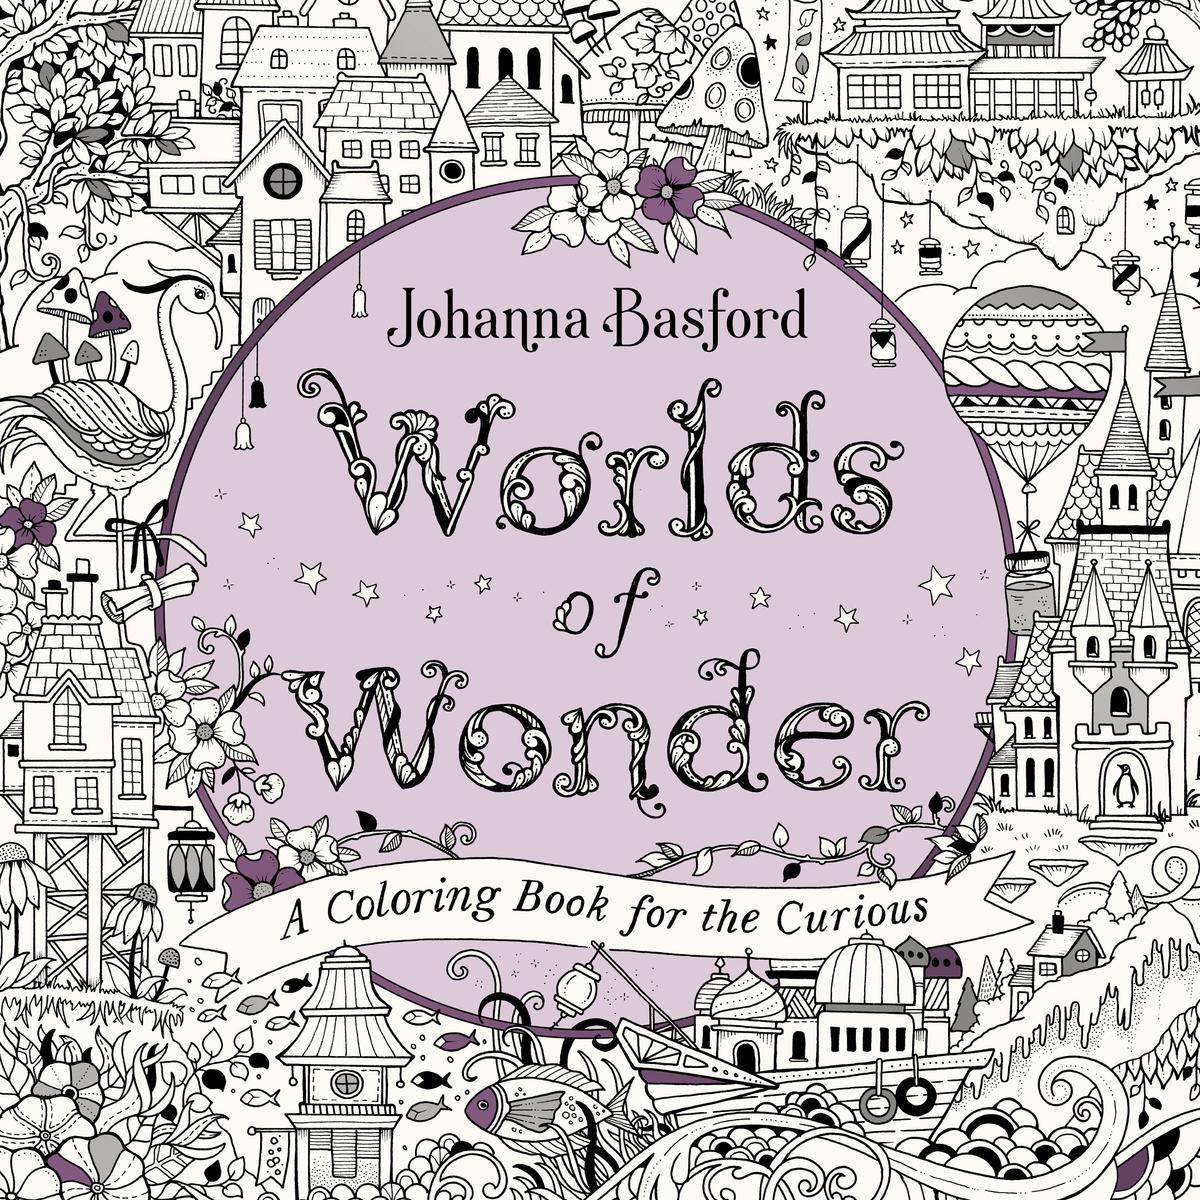 Worlds of Wonder - A Coloring Book for the Curious